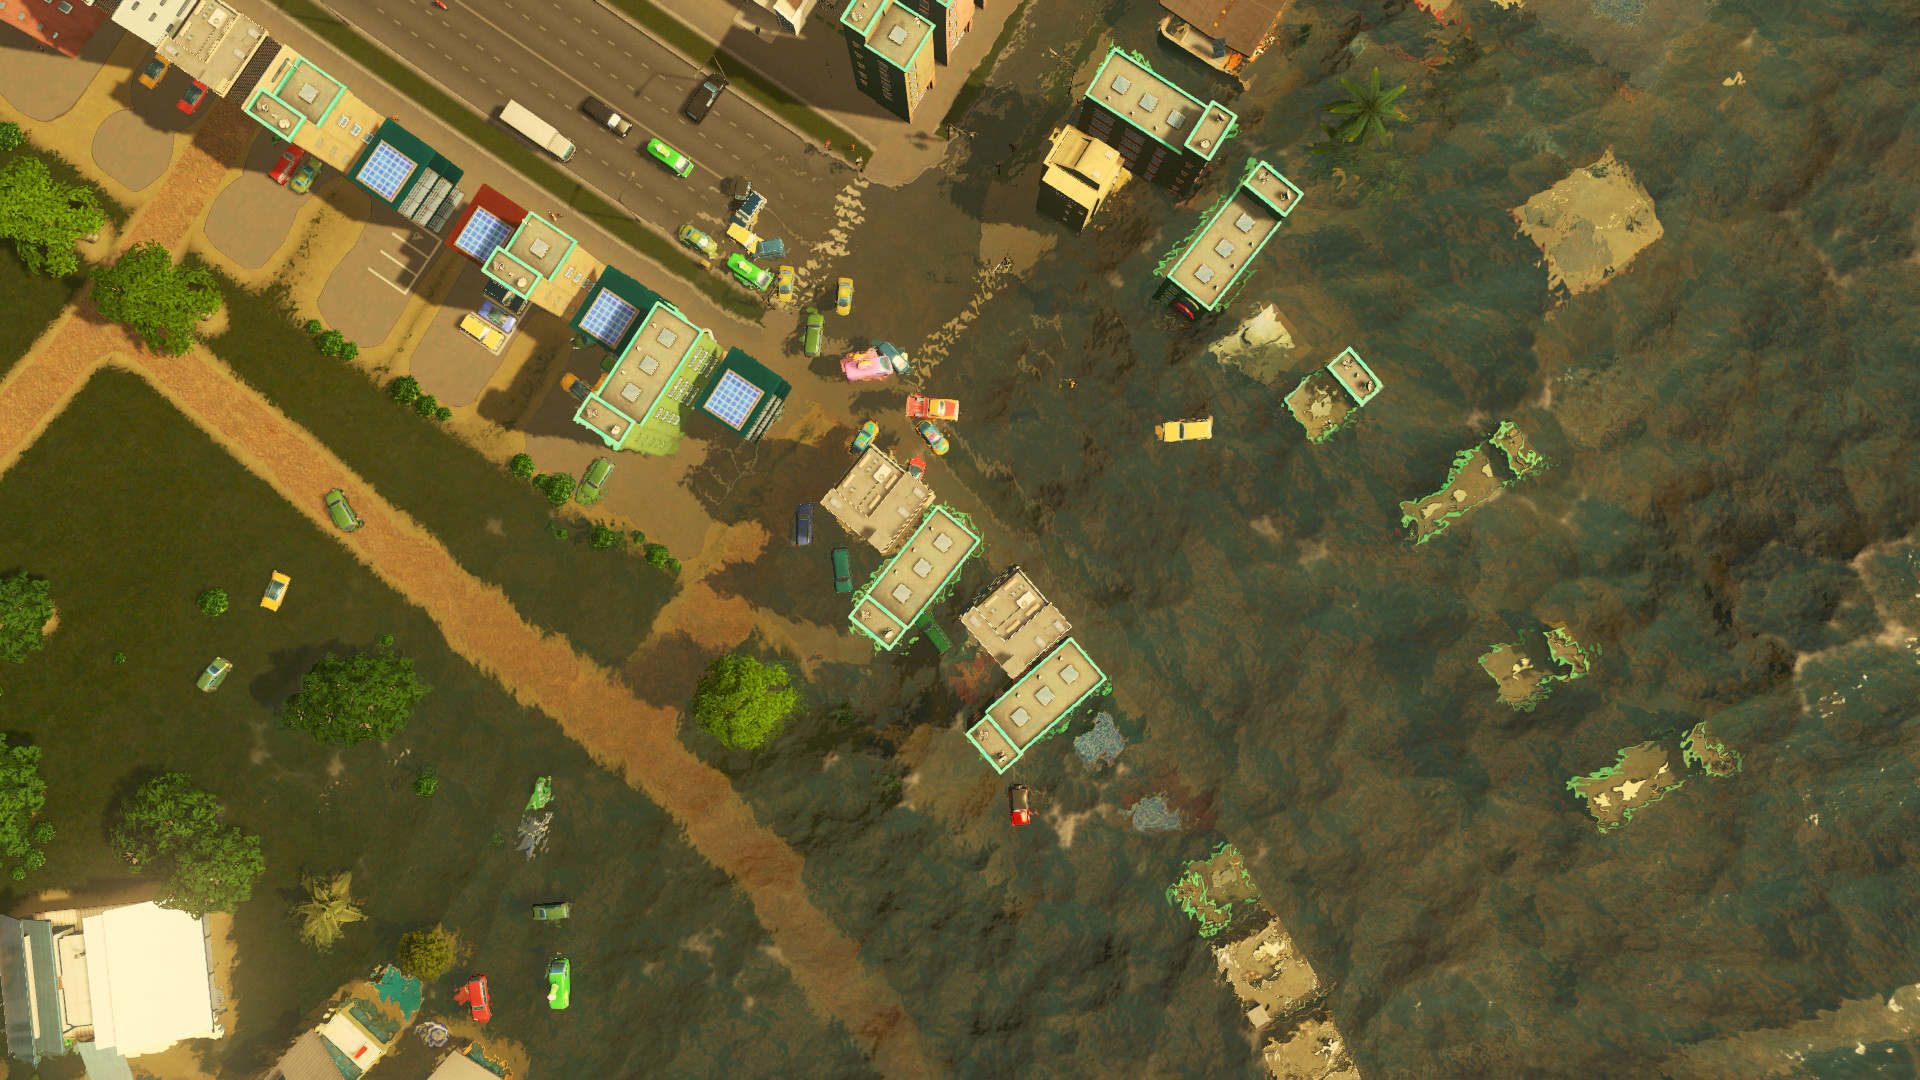 Cities Skylines Natural Disasters On Steam - steam workshop roblox survive the disasters